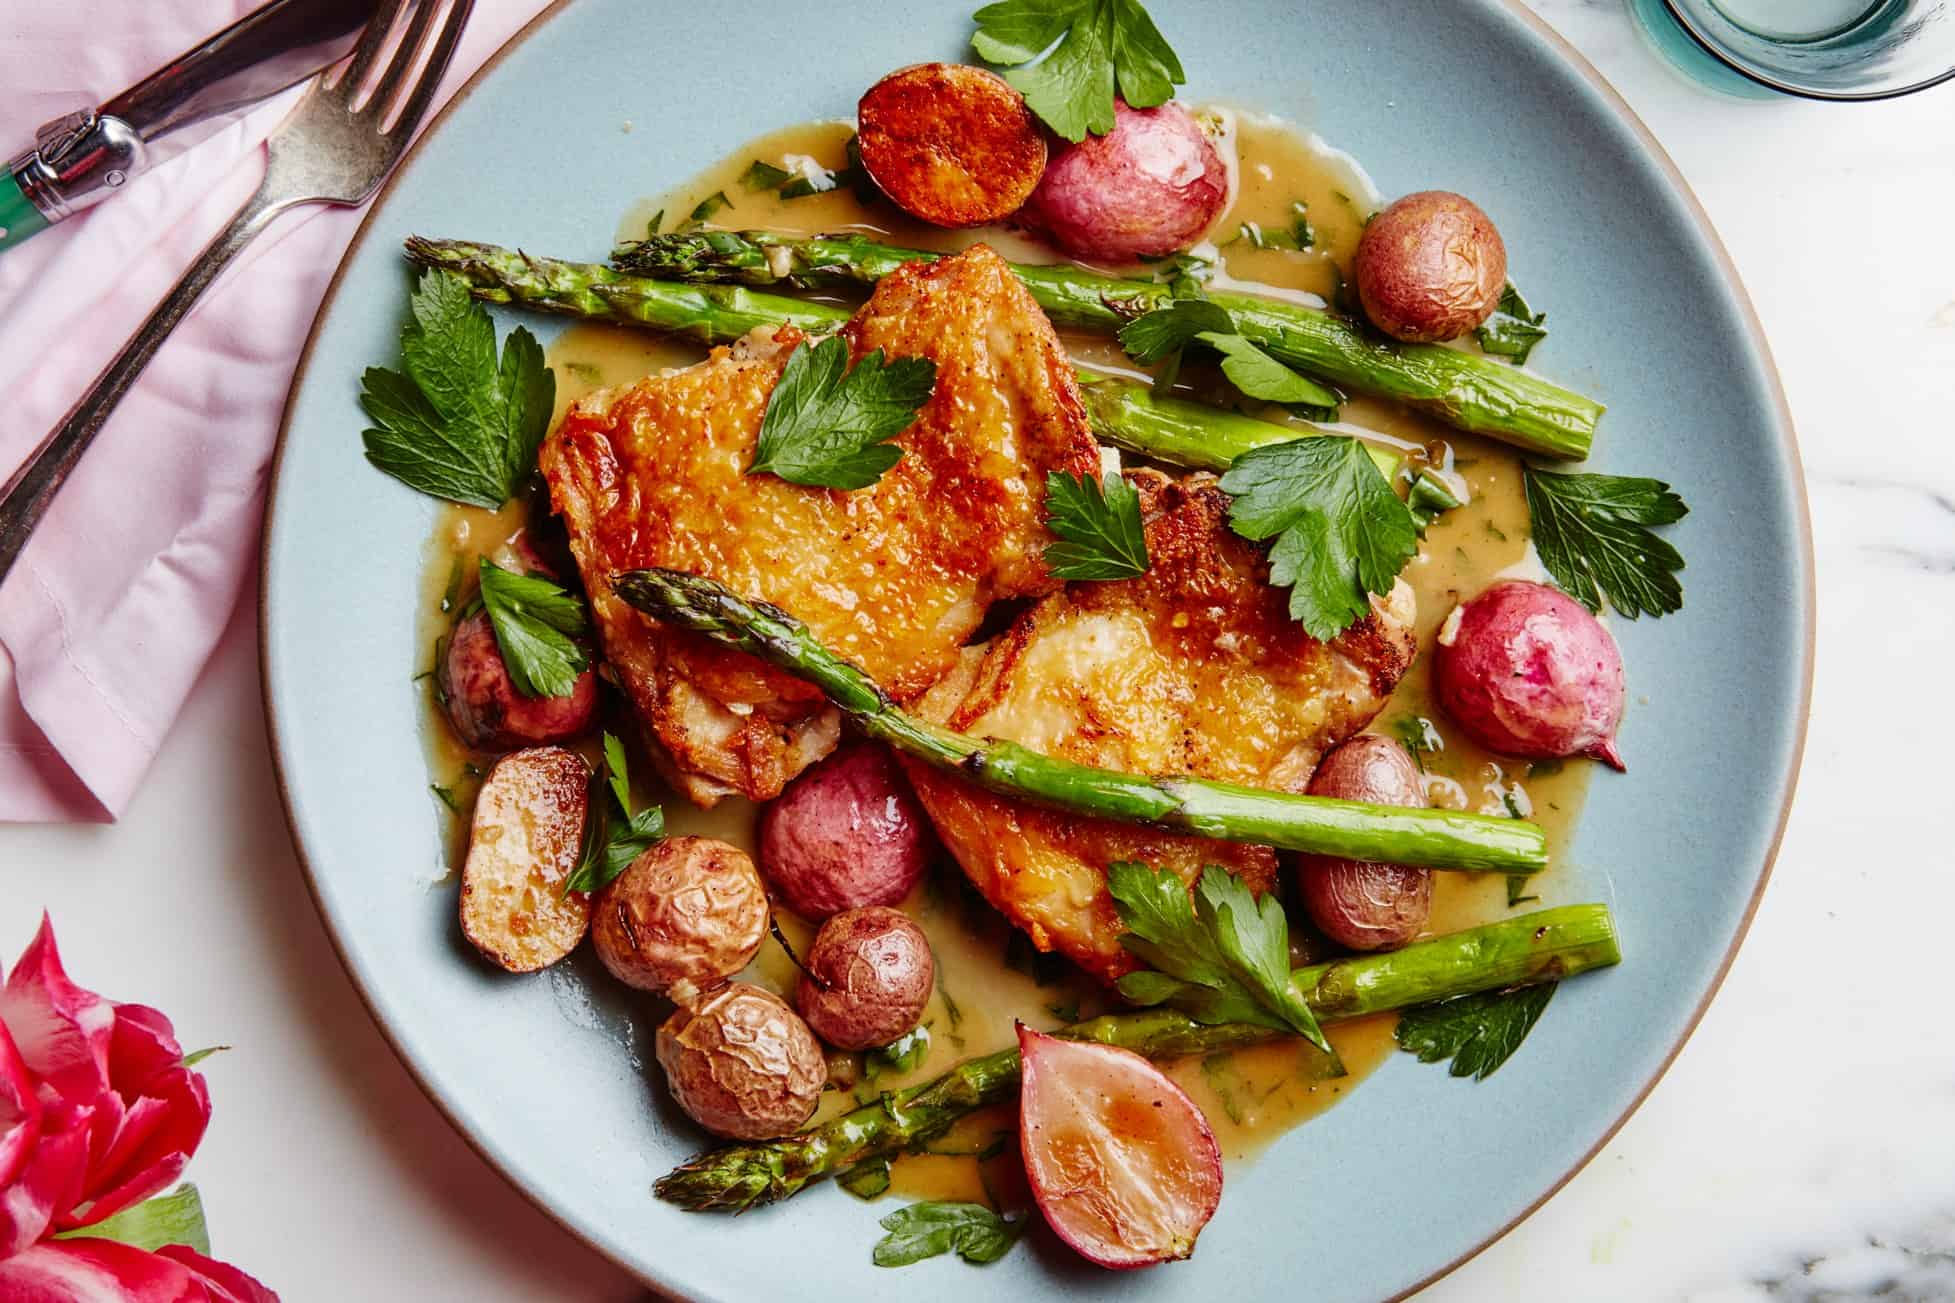 Crispy chicken thighs with spring vegetables